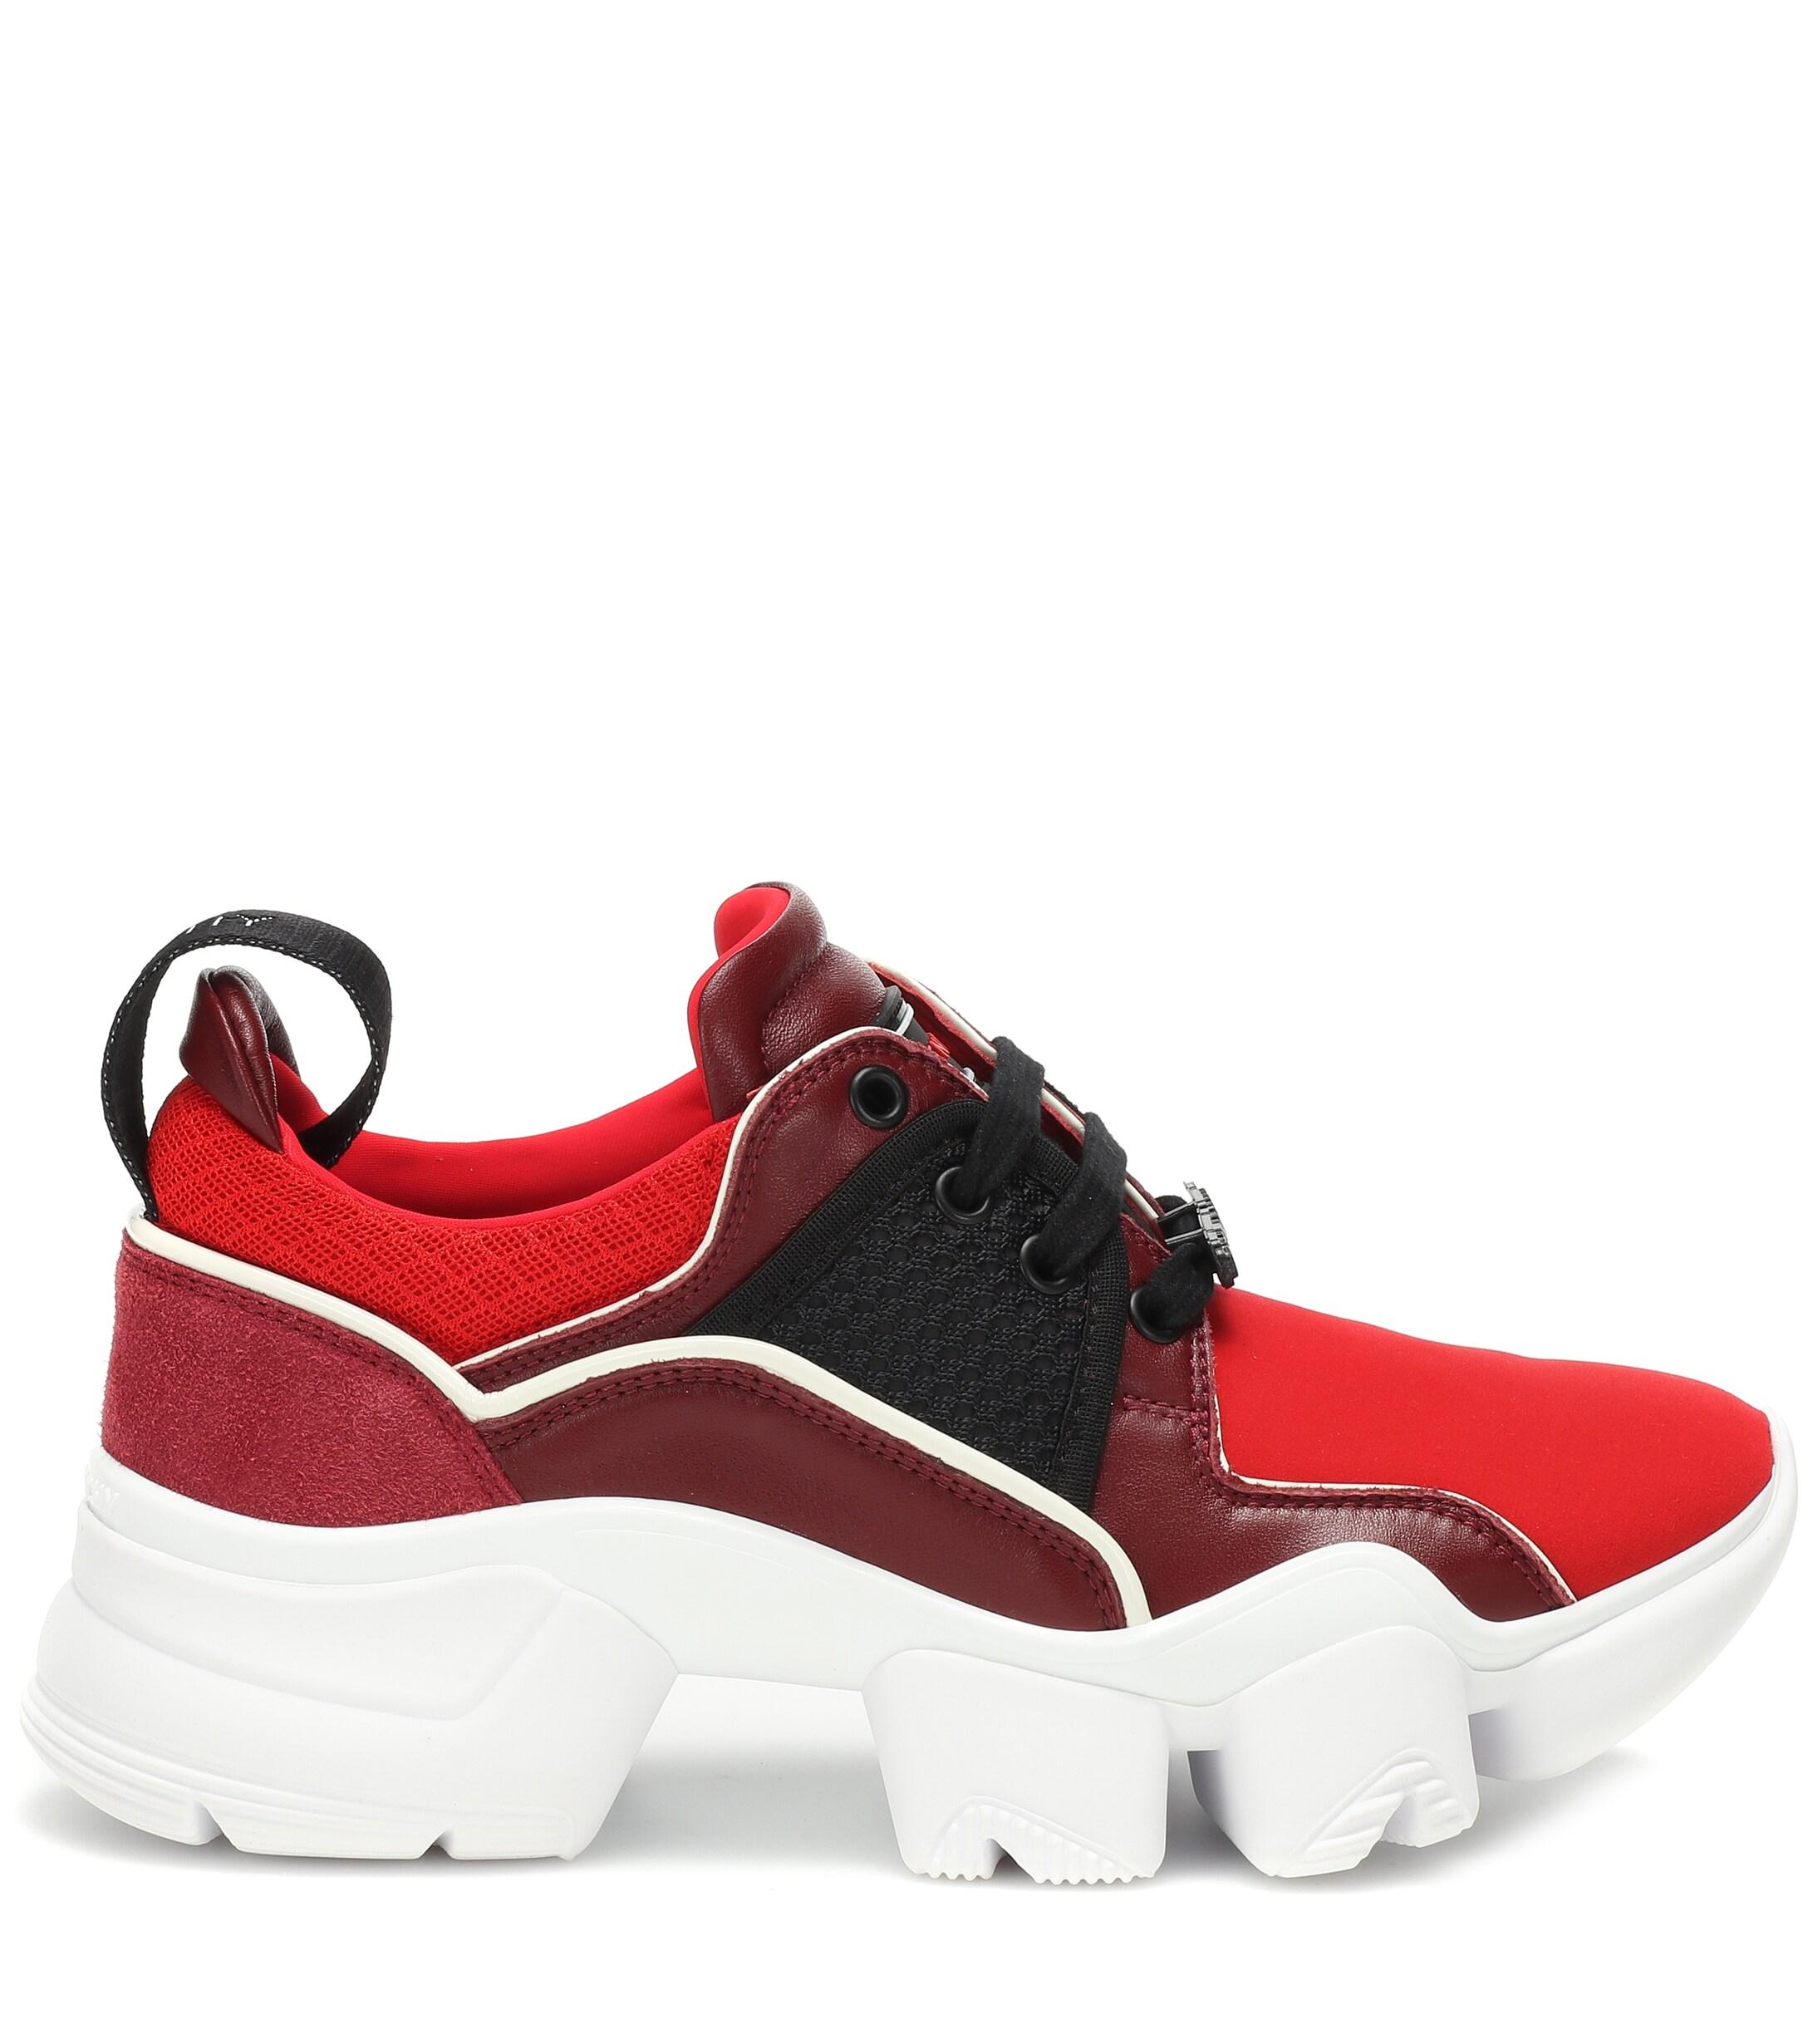 Givenchy Neoprene Jaw Low Sneakers in Bright Red (Red) - Lyst